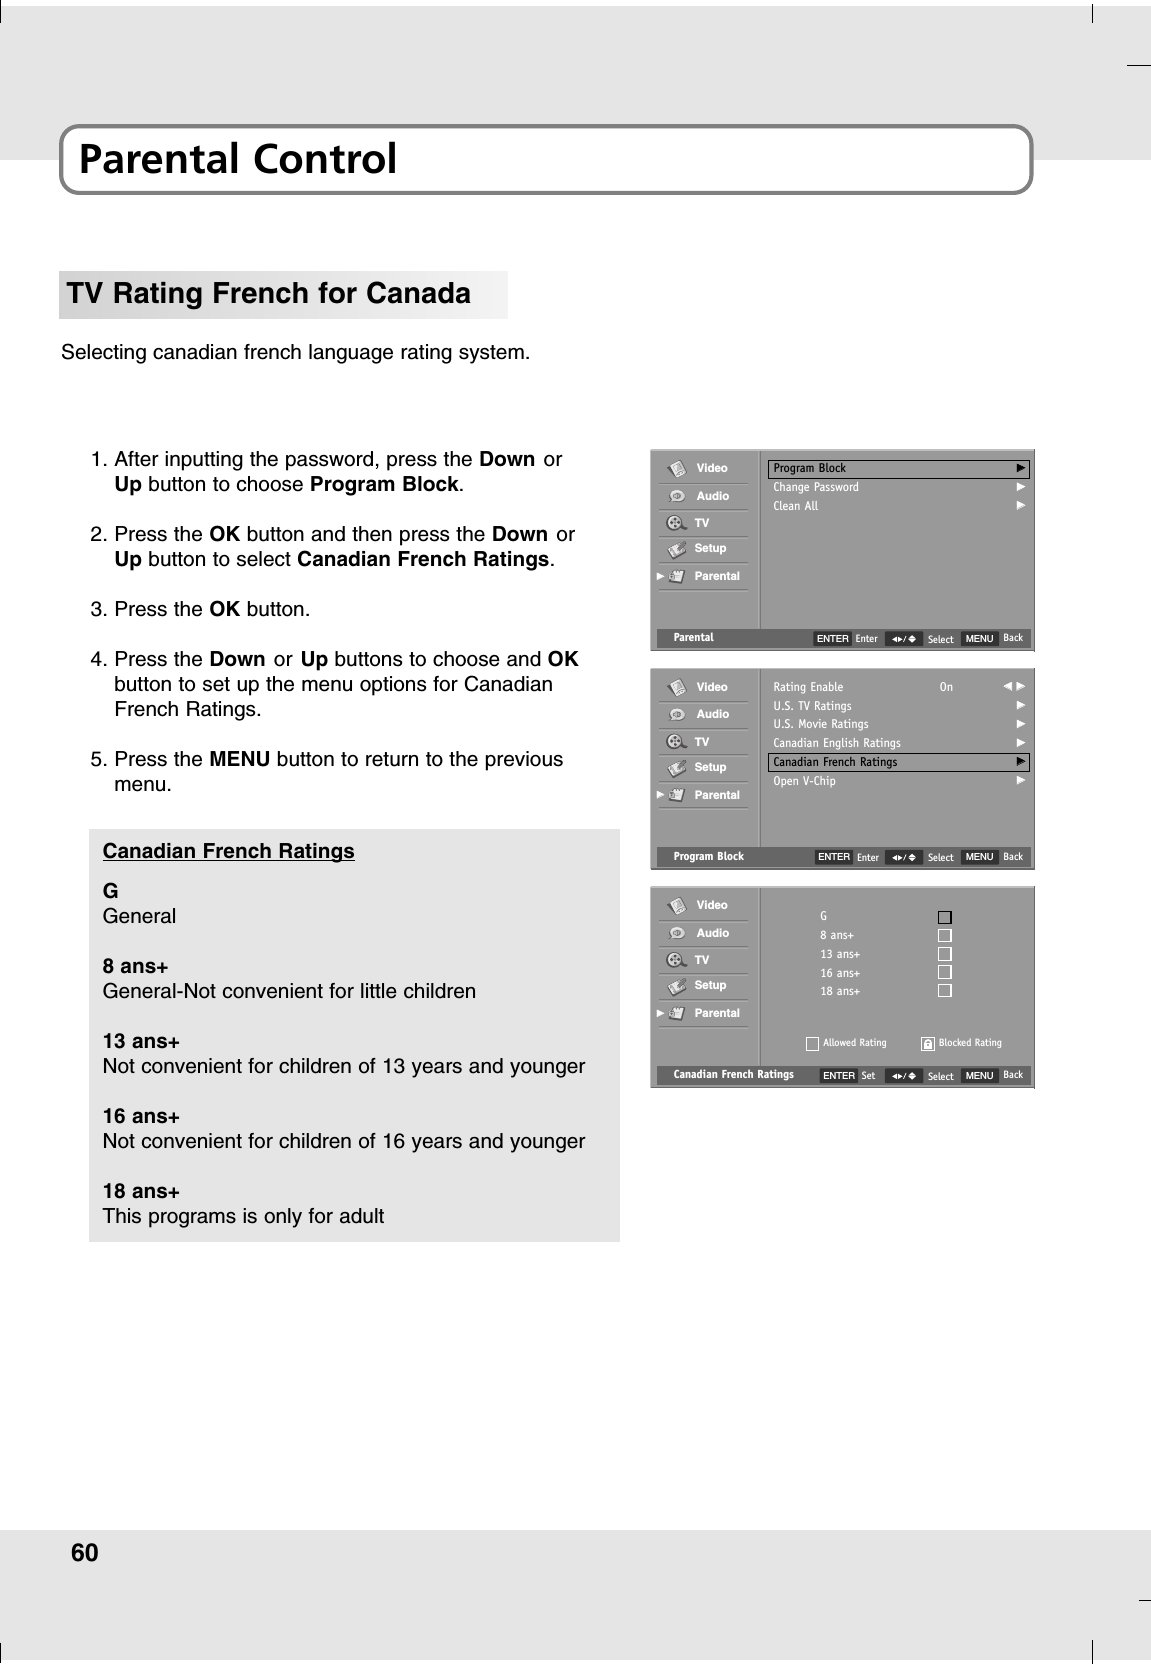 60Parental ControlTV Rating French for CanadaSelecting canadian french language rating system.1. After inputting the password, press the Down orUp button to choose Program Block.2. Press the OK button and then press the Down orUp button to select Canadian French Ratings.3. Press the OK button.4. Press the Down or Up buttons to choose and OKbutton to set up the menu options for CanadianFrench Ratings.5. Press the MENU button to return to the previousmenu.Canadian French Ratings MENU BackSelectG8 ans+13 ans+16 ans+18 ans+Allowed RatingVideoAudioTVSetupParentalGGBlocked RatingENTER SetGGeneral8 ans+General-Not convenient for little children13 ans+Not convenient for children of 13 years and younger16 ans+Not convenient for children of 16 years and younger18 ans+This programs is only for adultCanadian French Ratings Program Block MENU BackSelectRating EnableU.S. TV RatingsU.S. Movie RatingsCanadian English RatingsCanadian French RatingsOpen V-ChipOn FF  GGGGGGGGGGGGVideoAudioTVSetupParentalGGParental MENU BackSelectProgram BlockChange PasswordClean AllGGGGGGVideoAudioTVSetupParentalGGENTER EnterENTER Enter